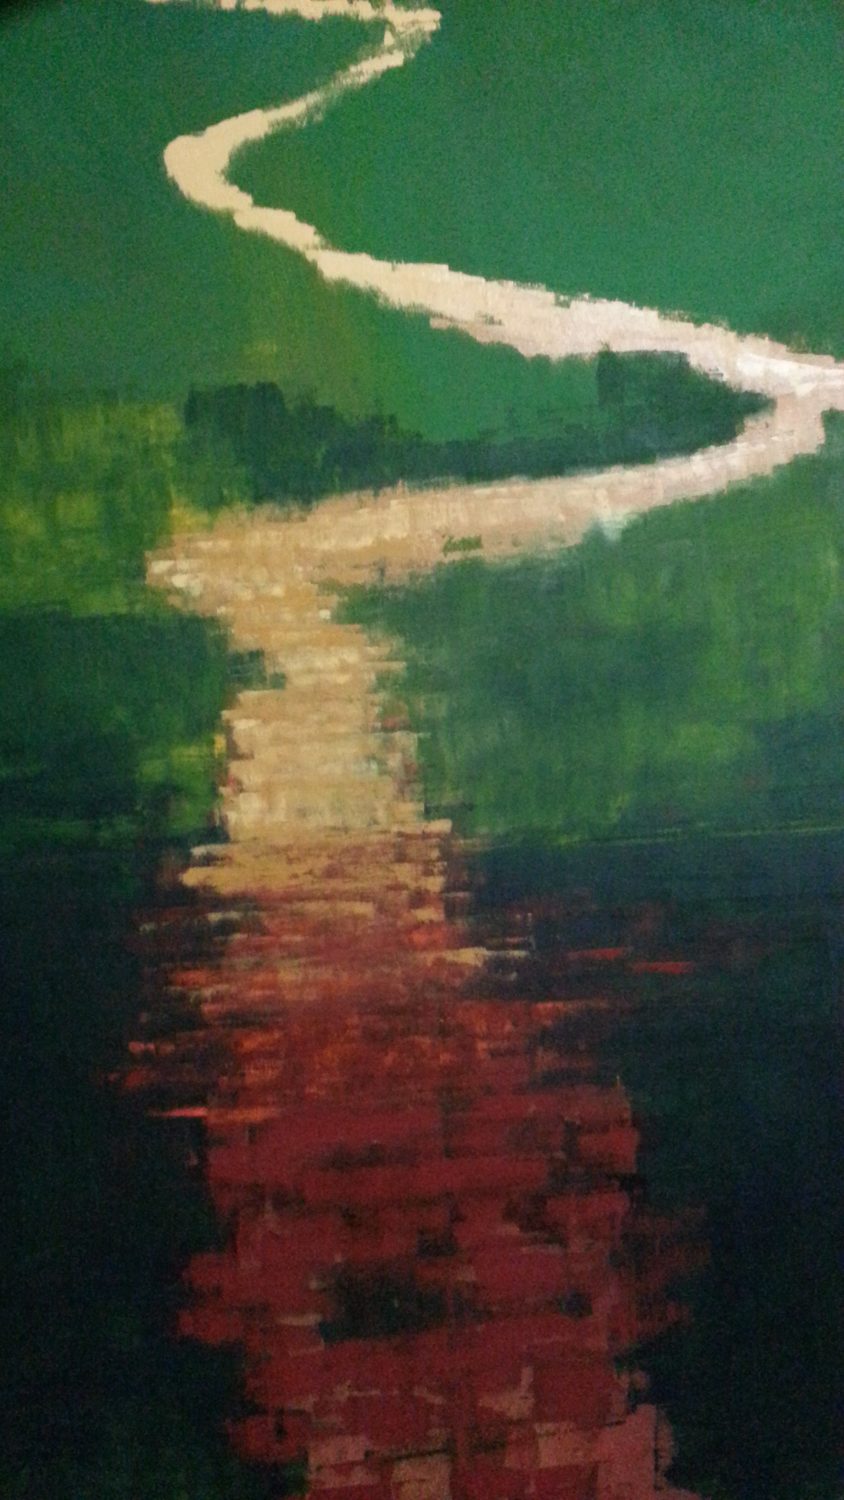 thumbnail of Rumbo al Lago by Jerónimo López. medium: oil on canvas. date: unknown. dimensions: 31.5 x 23.62 inches